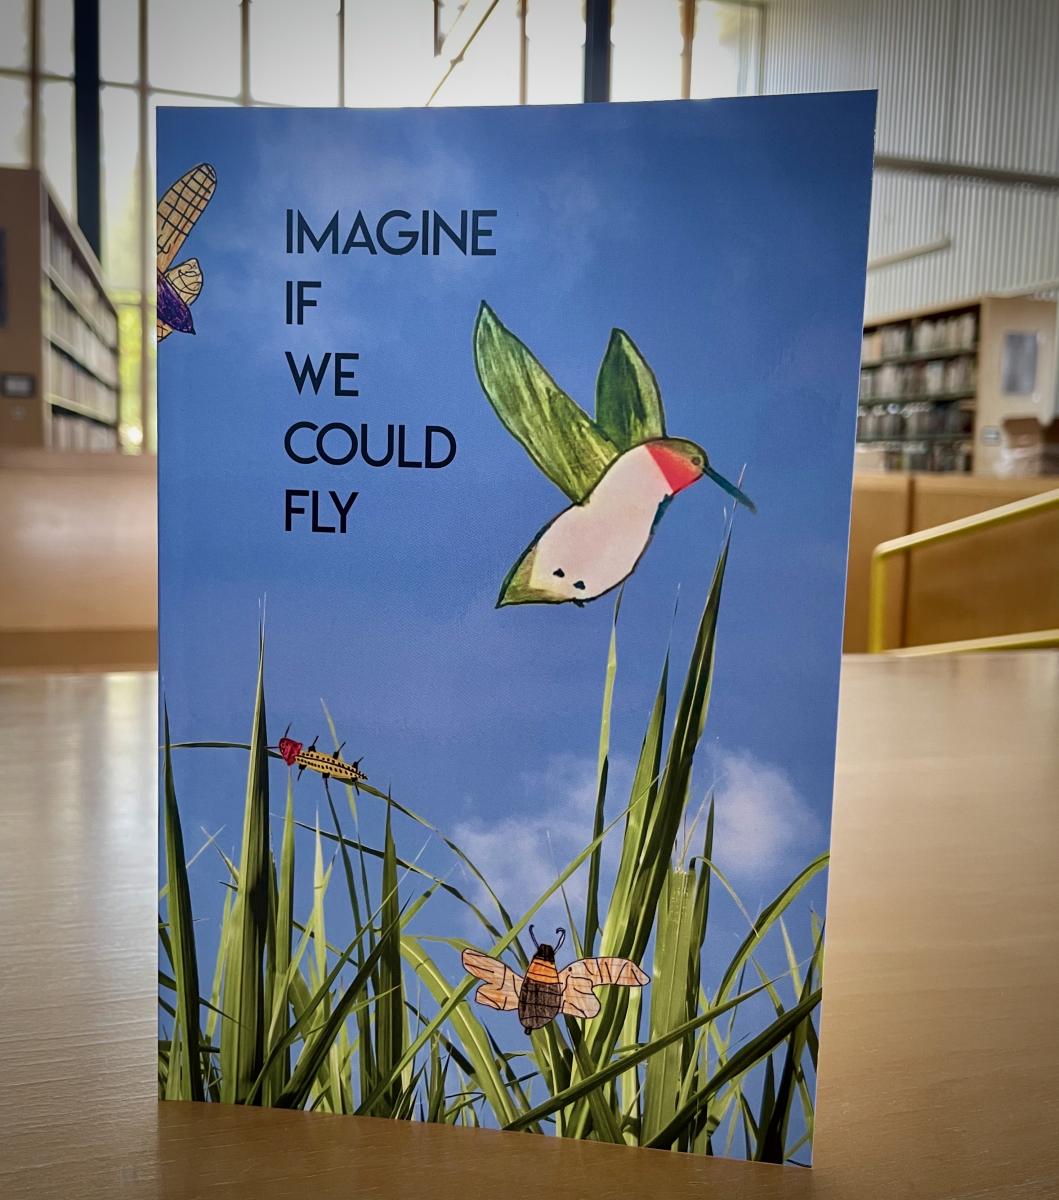 Book that reads "Imagine if we could fly" with a bird on it, grass, and a blue background